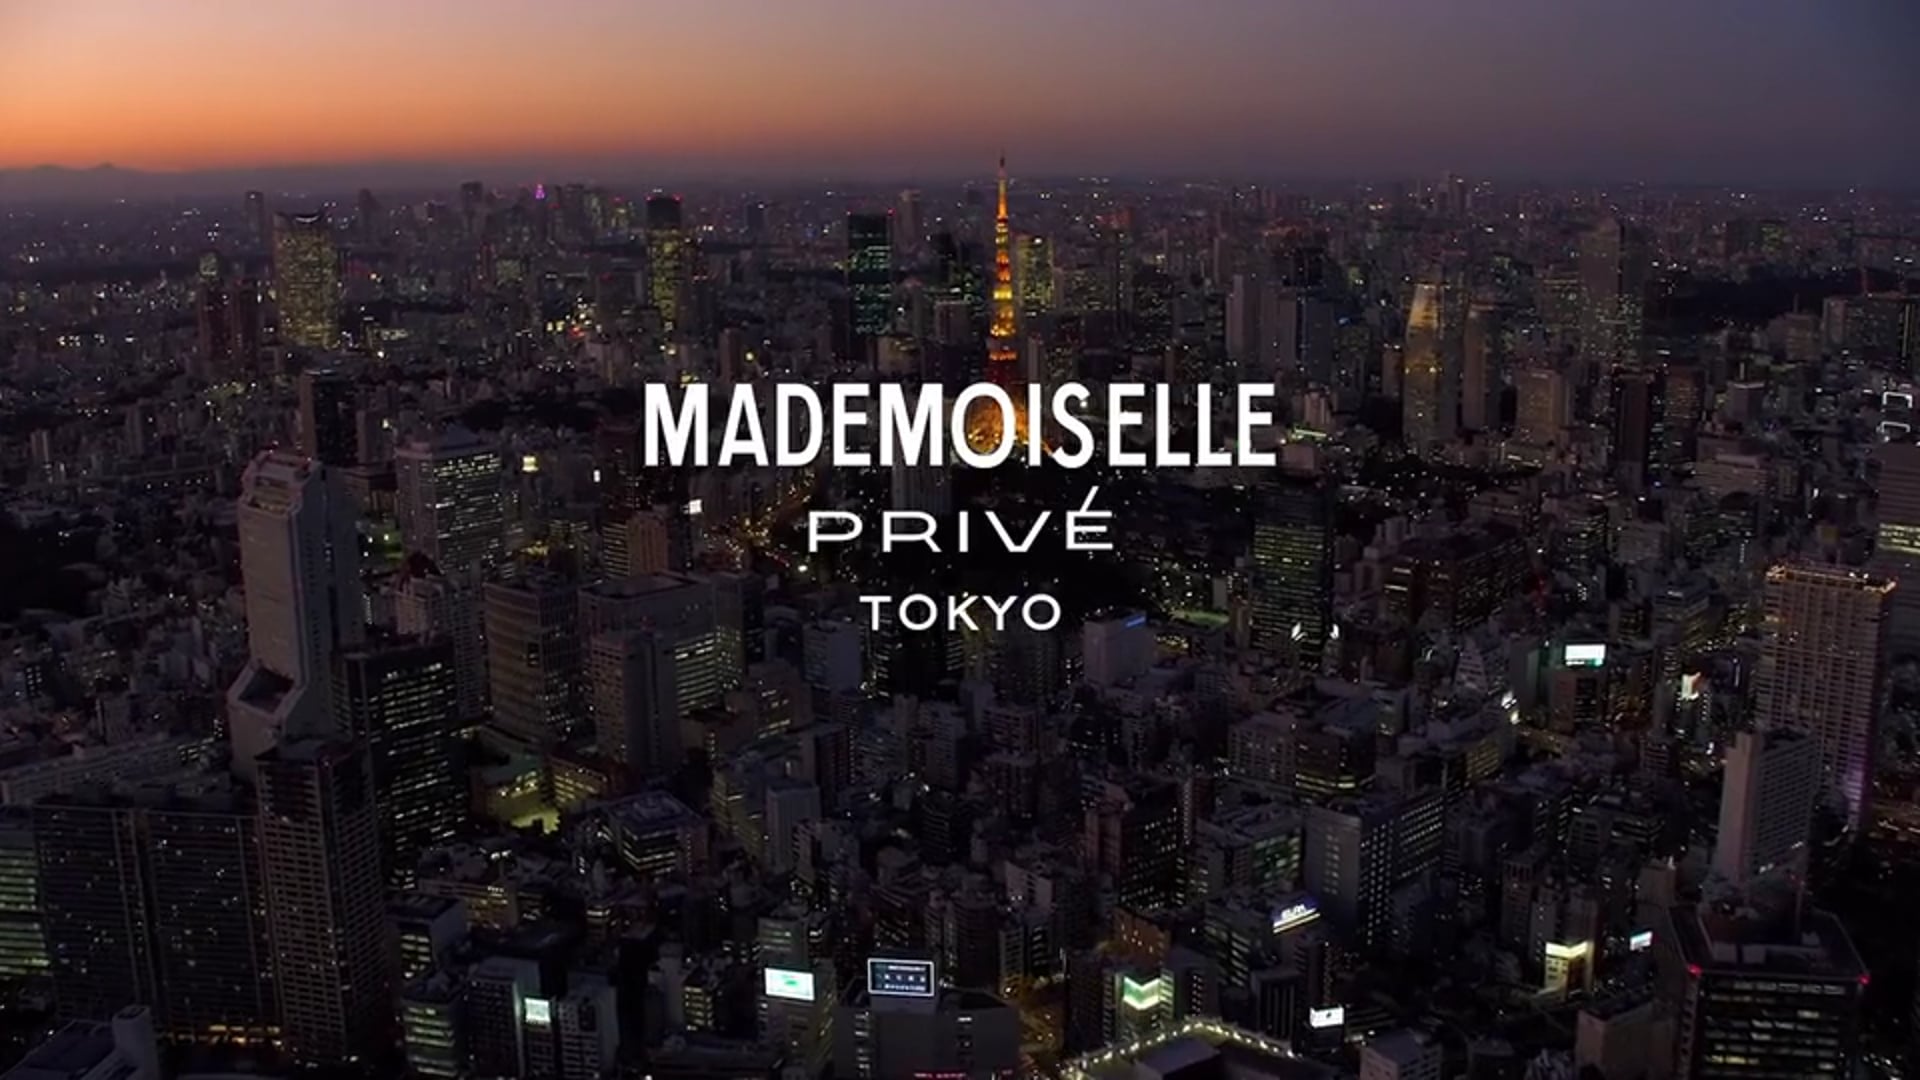 Mademoiselle Privé Tokyo Opening Party - CHANEL